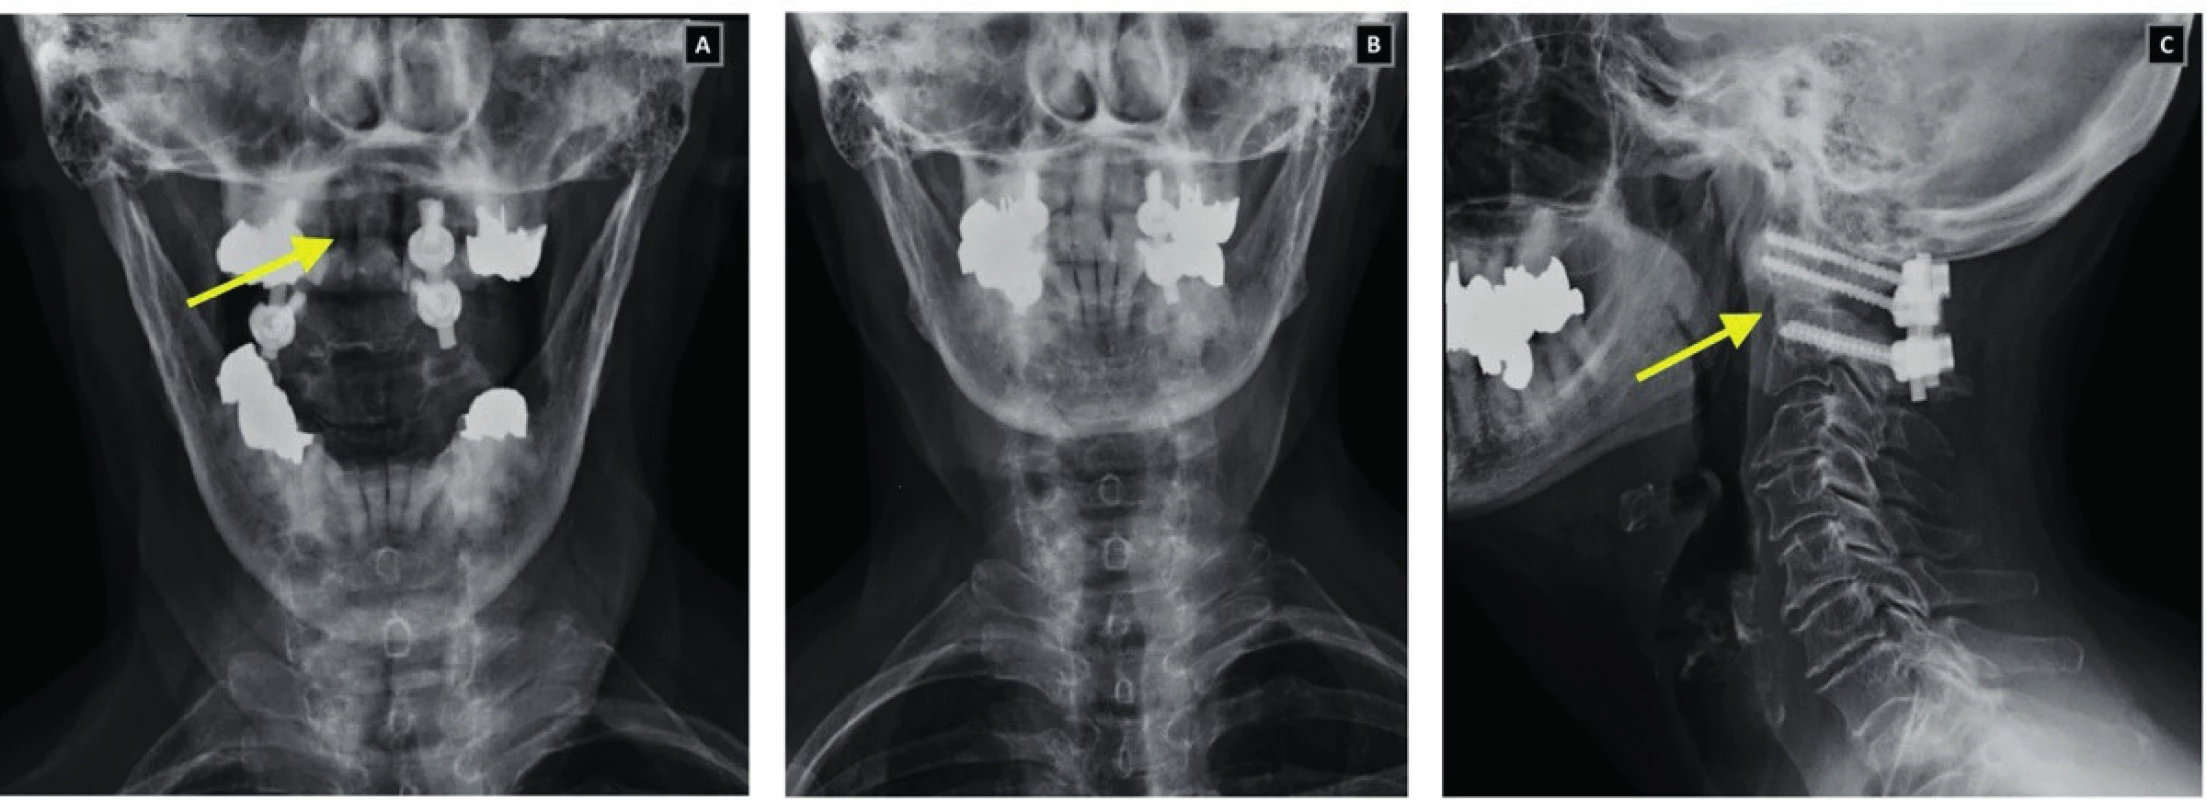 Cervical spine x-ray images in transoral (A), AP (B) and lateral (C) projection as well as images of a patient after posterior C1-2 fusion according to Harms. The arrow shows the location of the fracture